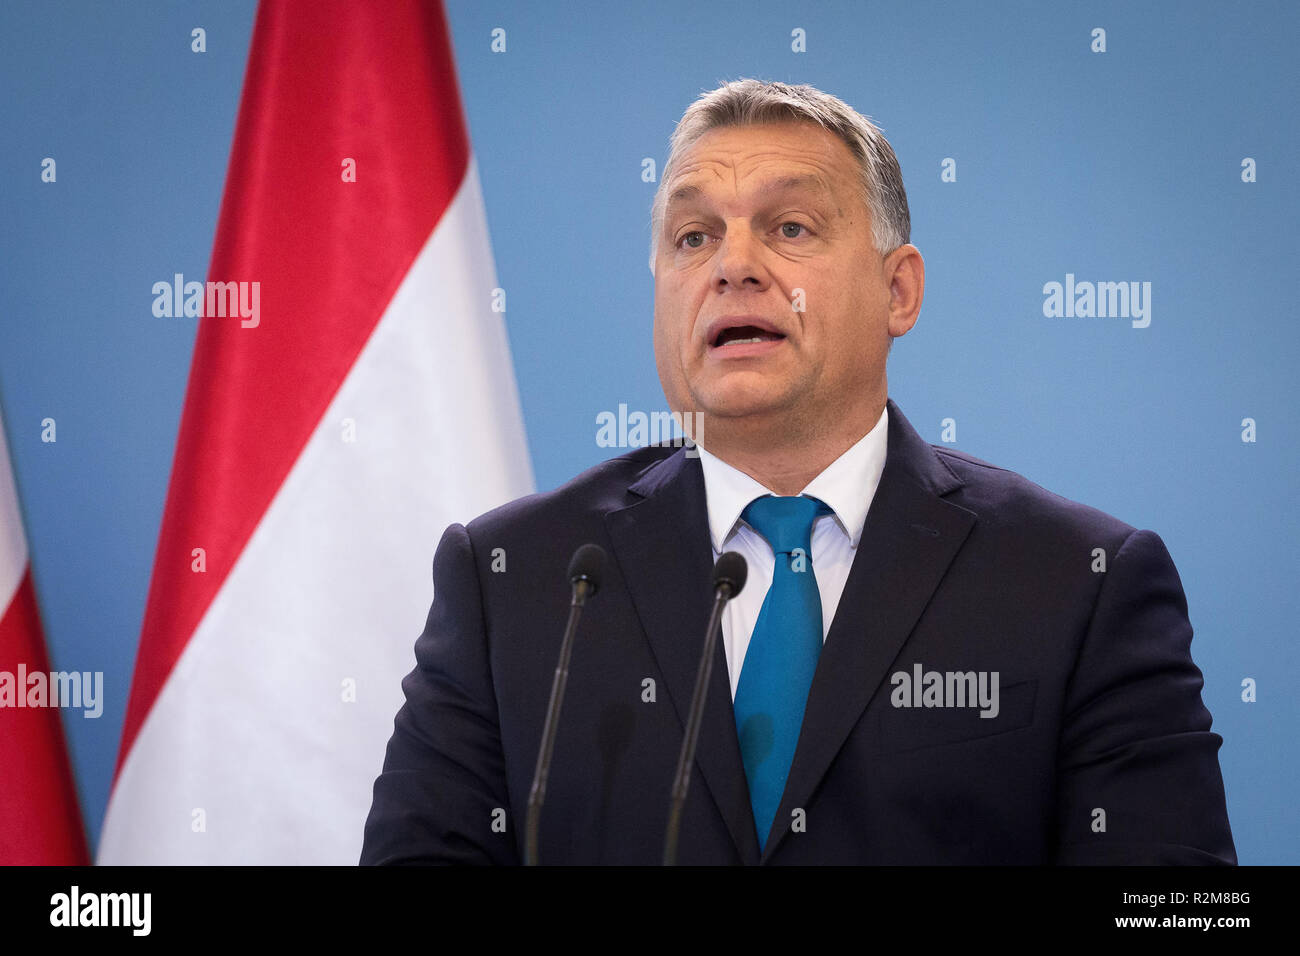 Prime Minister of Hungary Viktor Orban during the press conference after meeting with Prime Minister of Poland Beata Szydlo at Chancellery of the Prime Minister in Warsaw, Poland on 22 September 2017 Stock Photo